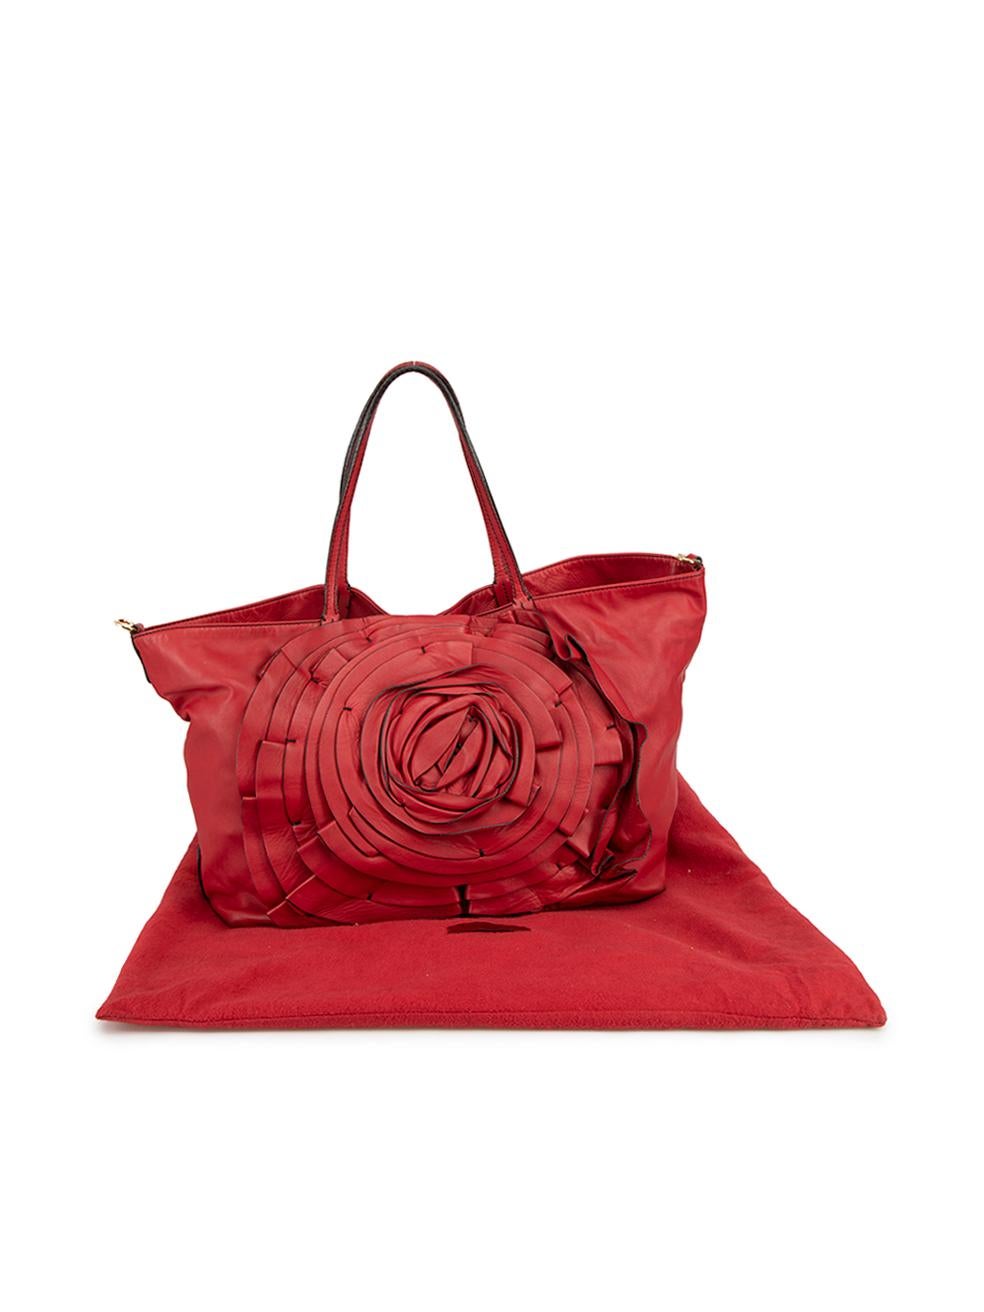 Valentino Women's Red Leather Rose Petal Tote 6